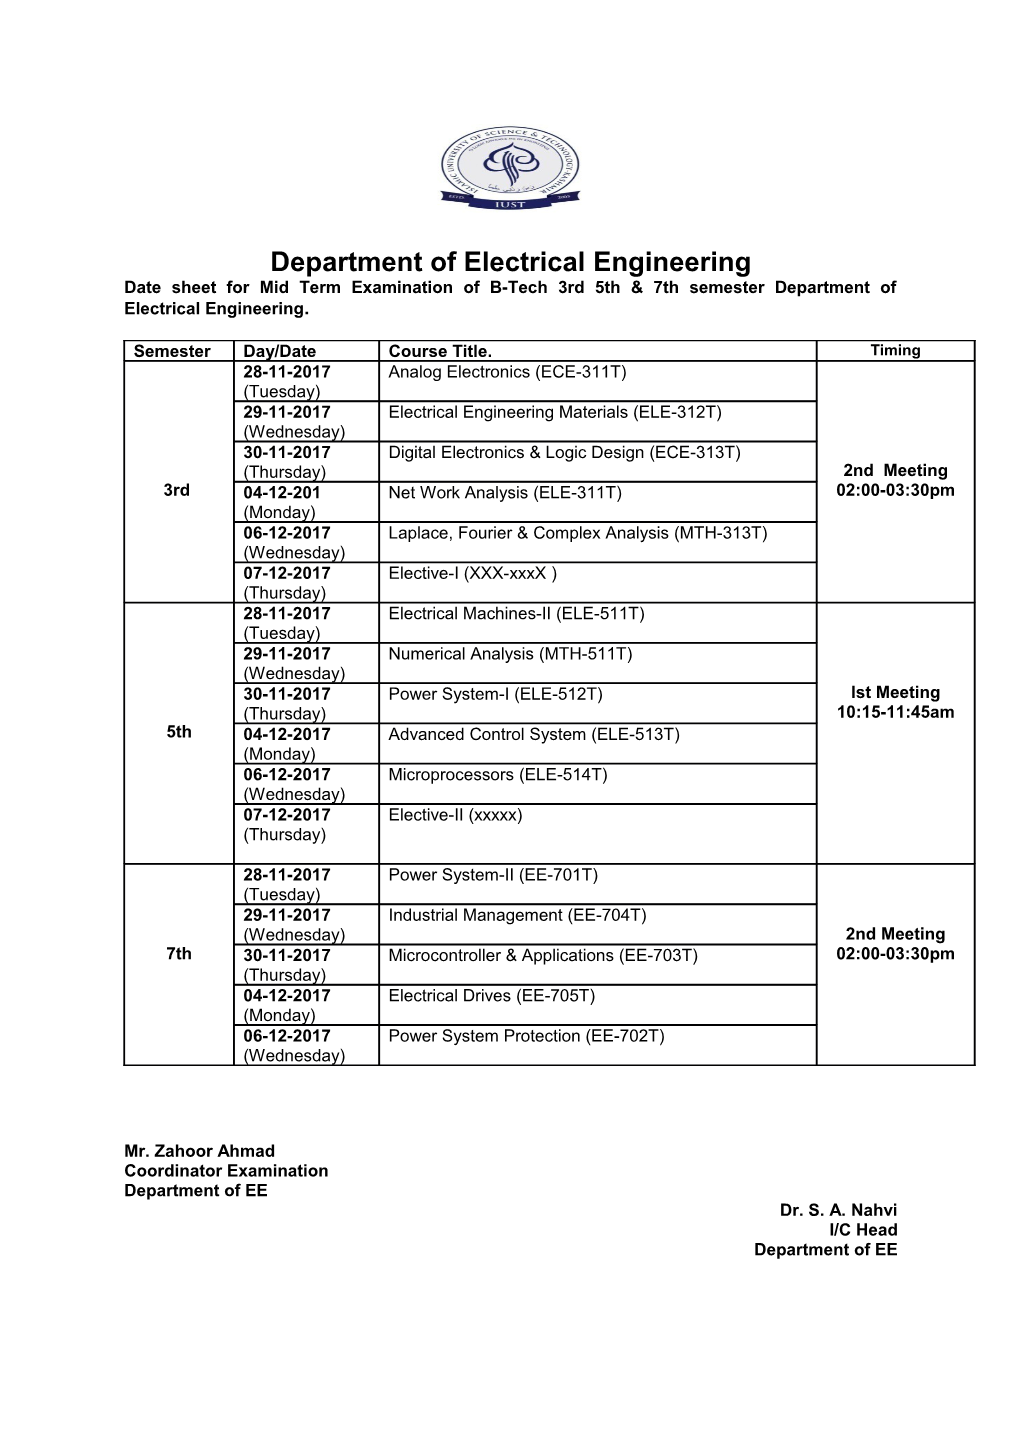 Date Sheet for Mid Term Examination of B-Tech 3Rd 5Th & 7Th Semester Department of Electrical